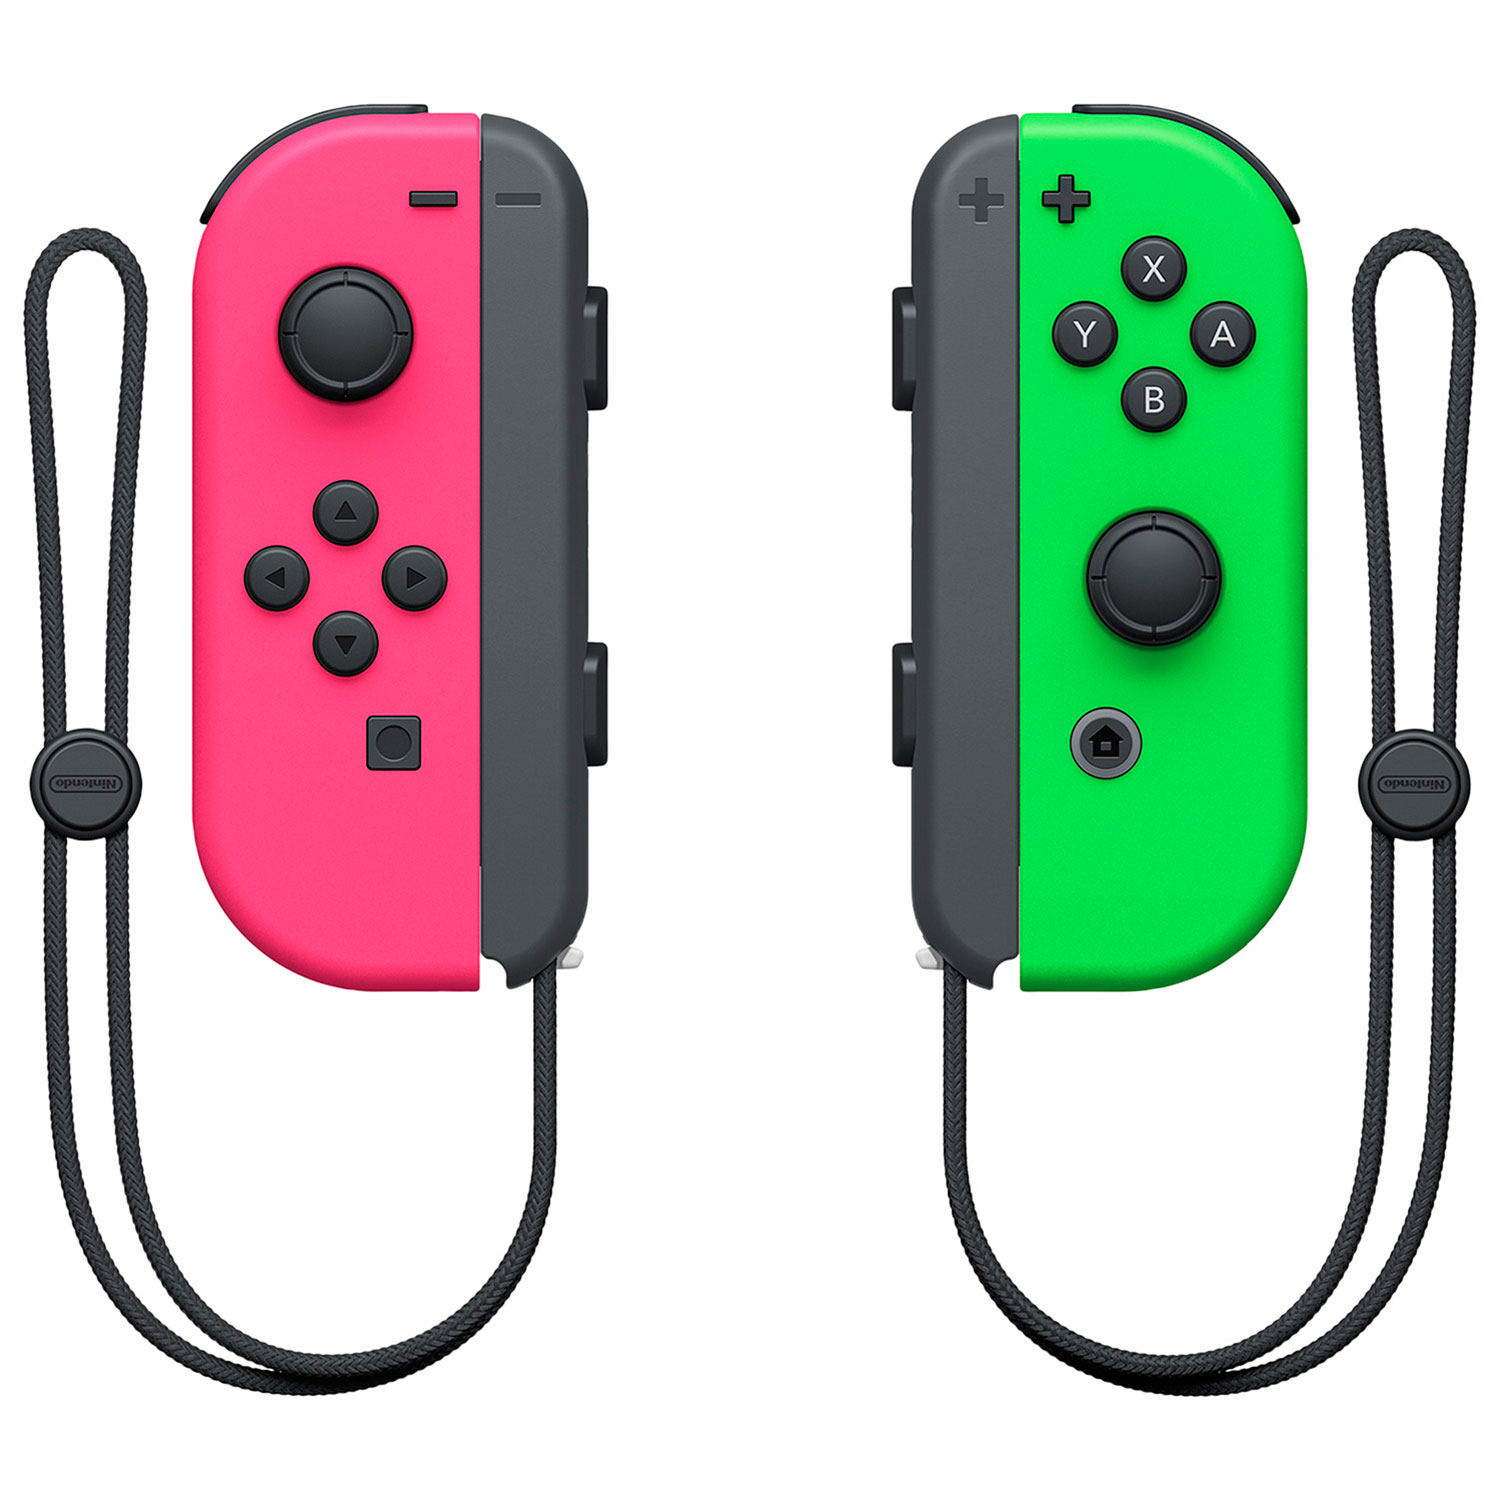 Nintendo Switch Left and Right Joy-Con Controllers - Neon Pink/Neon Green